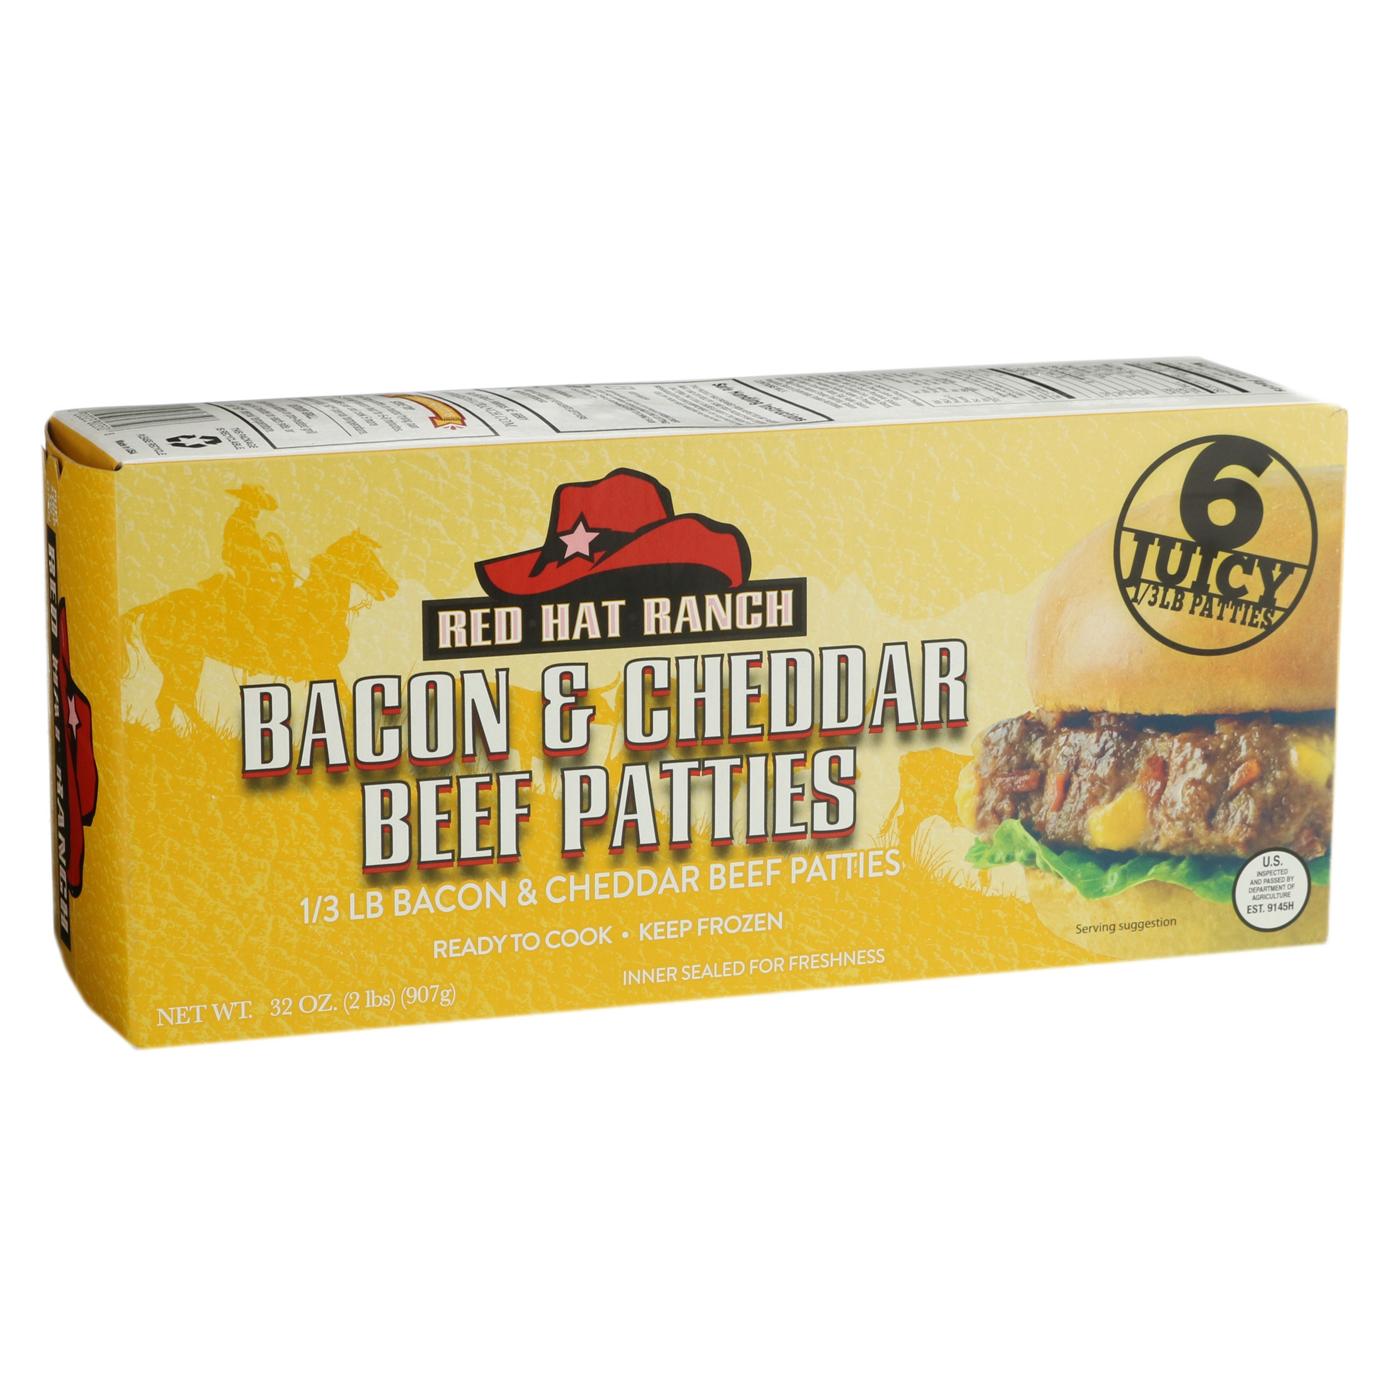 Red Hat Ranch Bacon & Cheddar Beef Patties; image 1 of 2